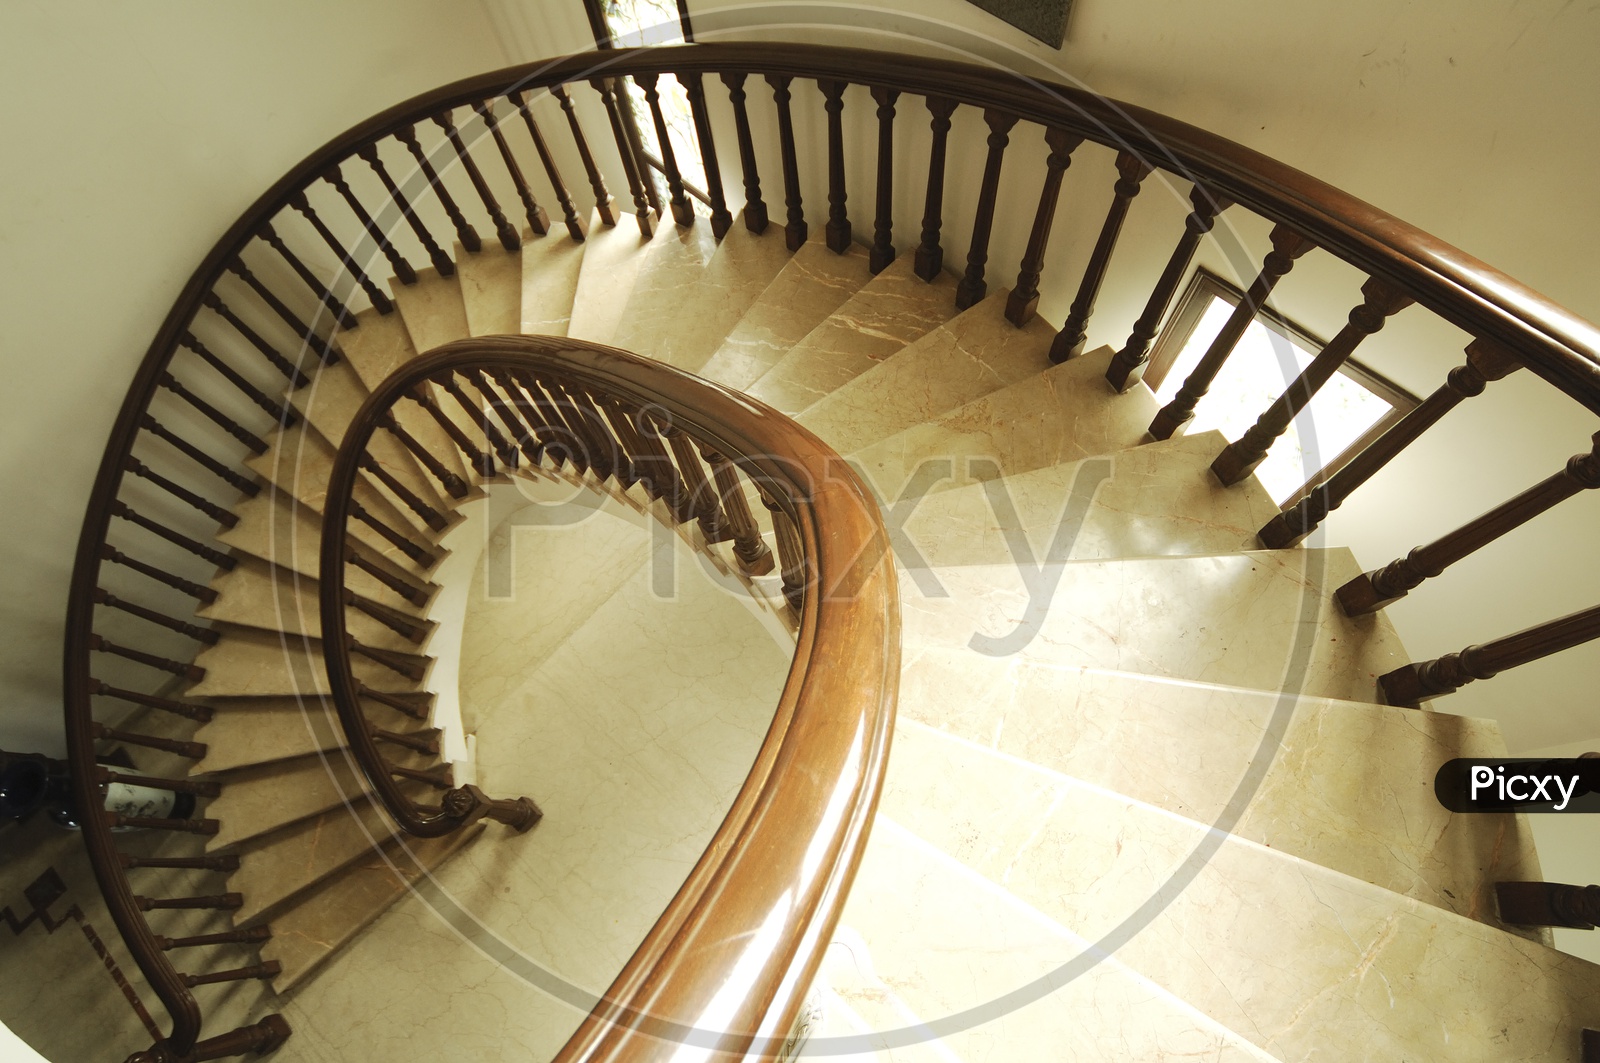 A Curved staircase